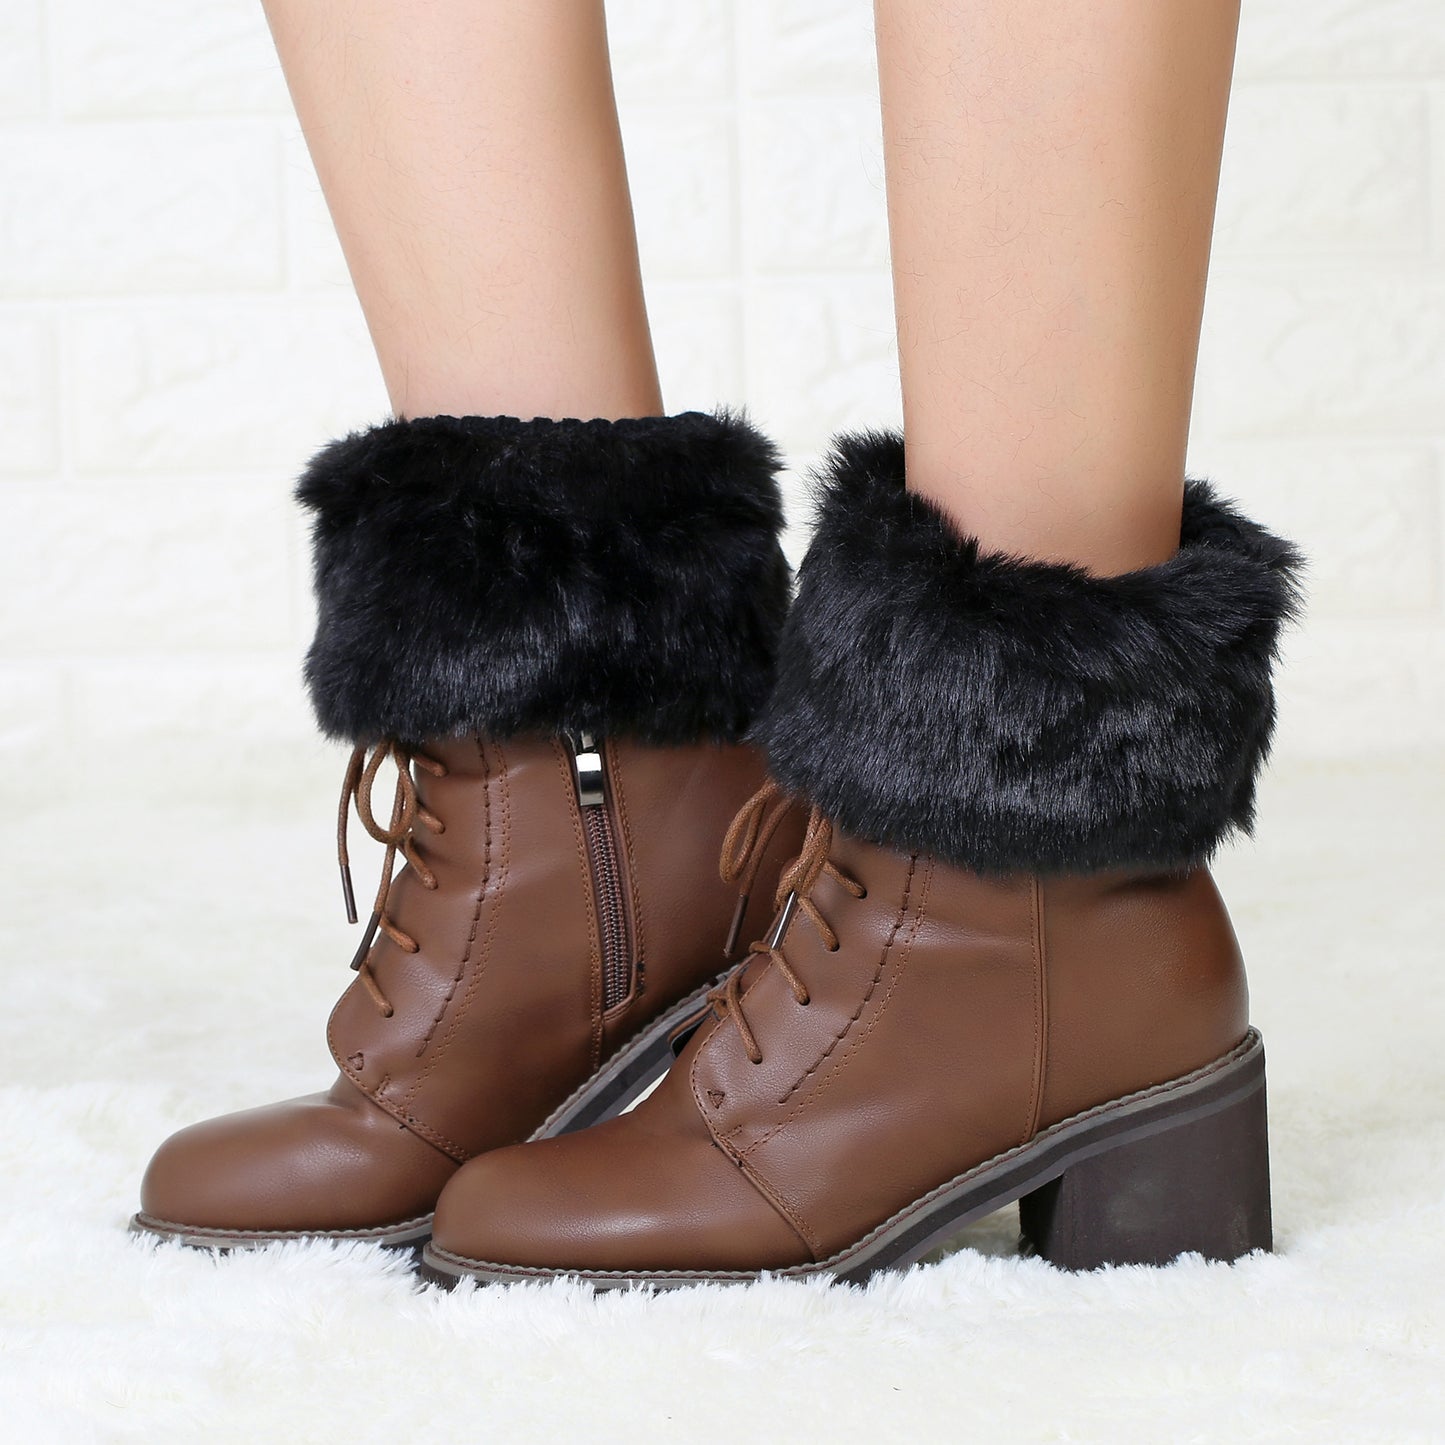 2 Pairs/set Knitted Fur Boot Covers for Women